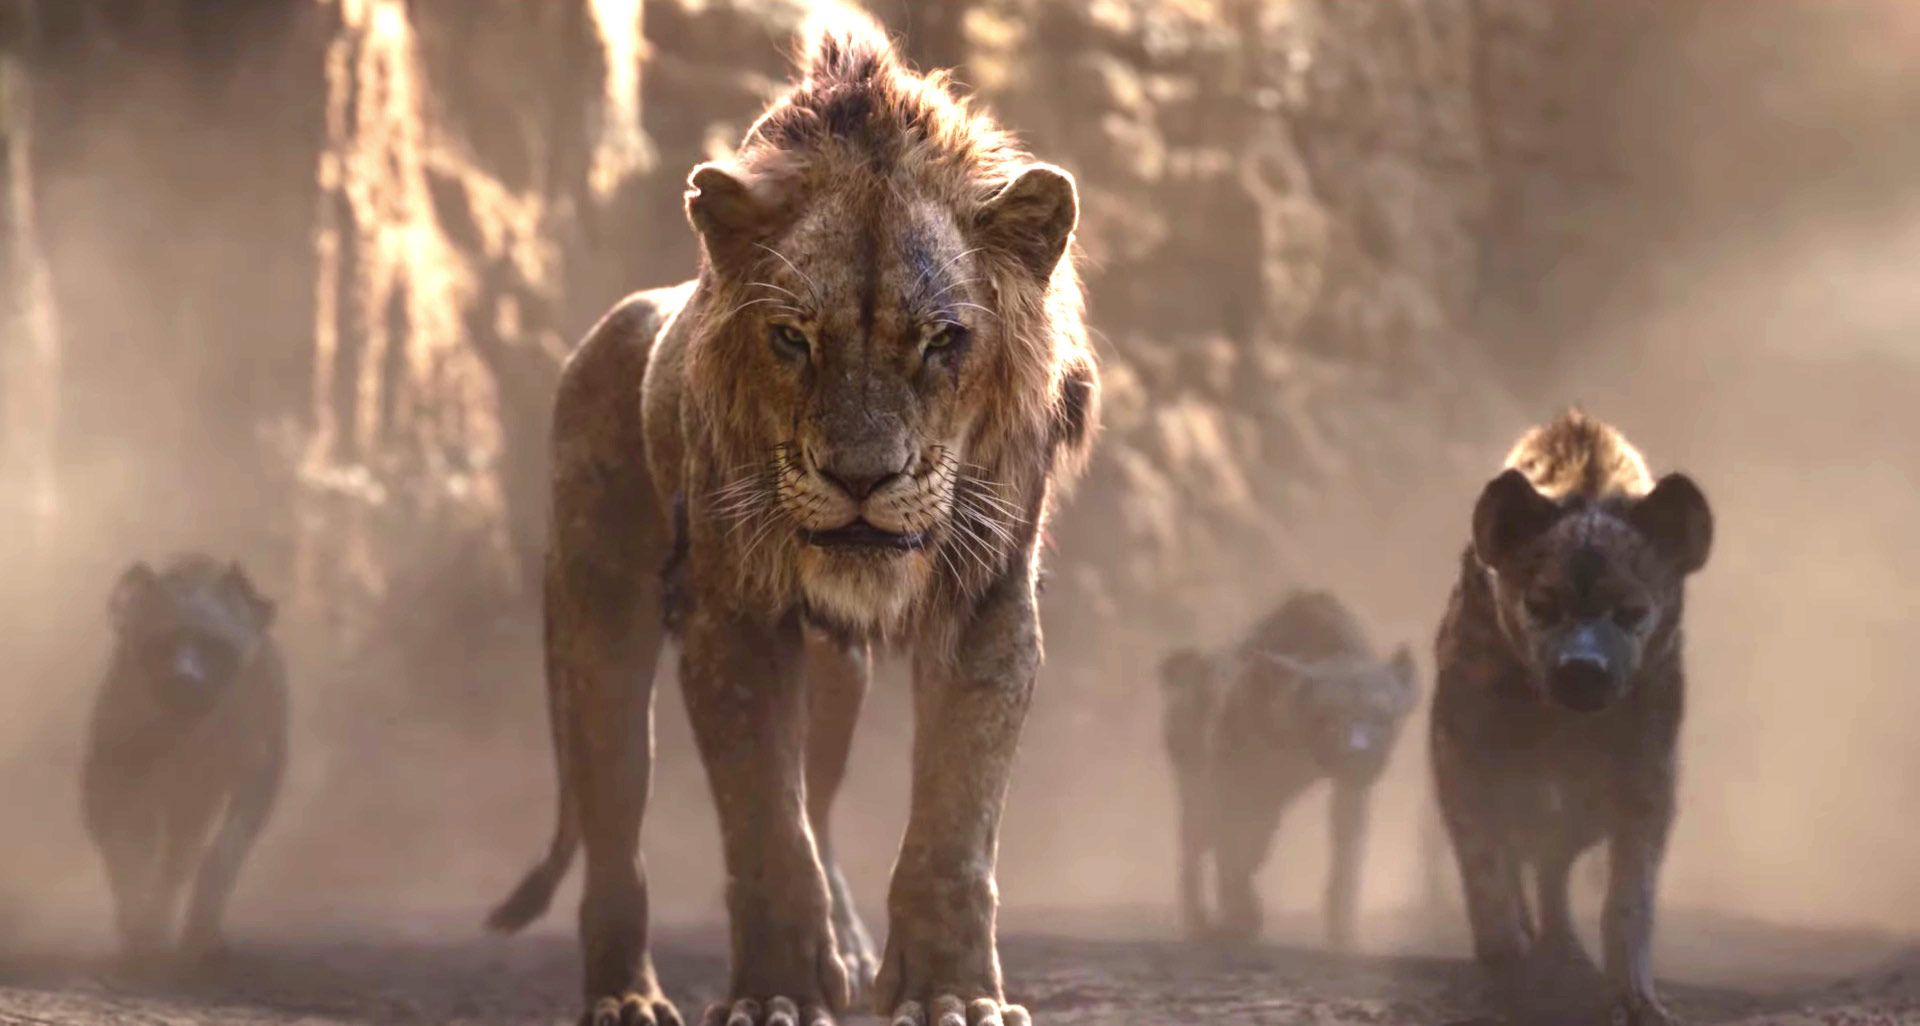 where to watch lion king 2 trailer